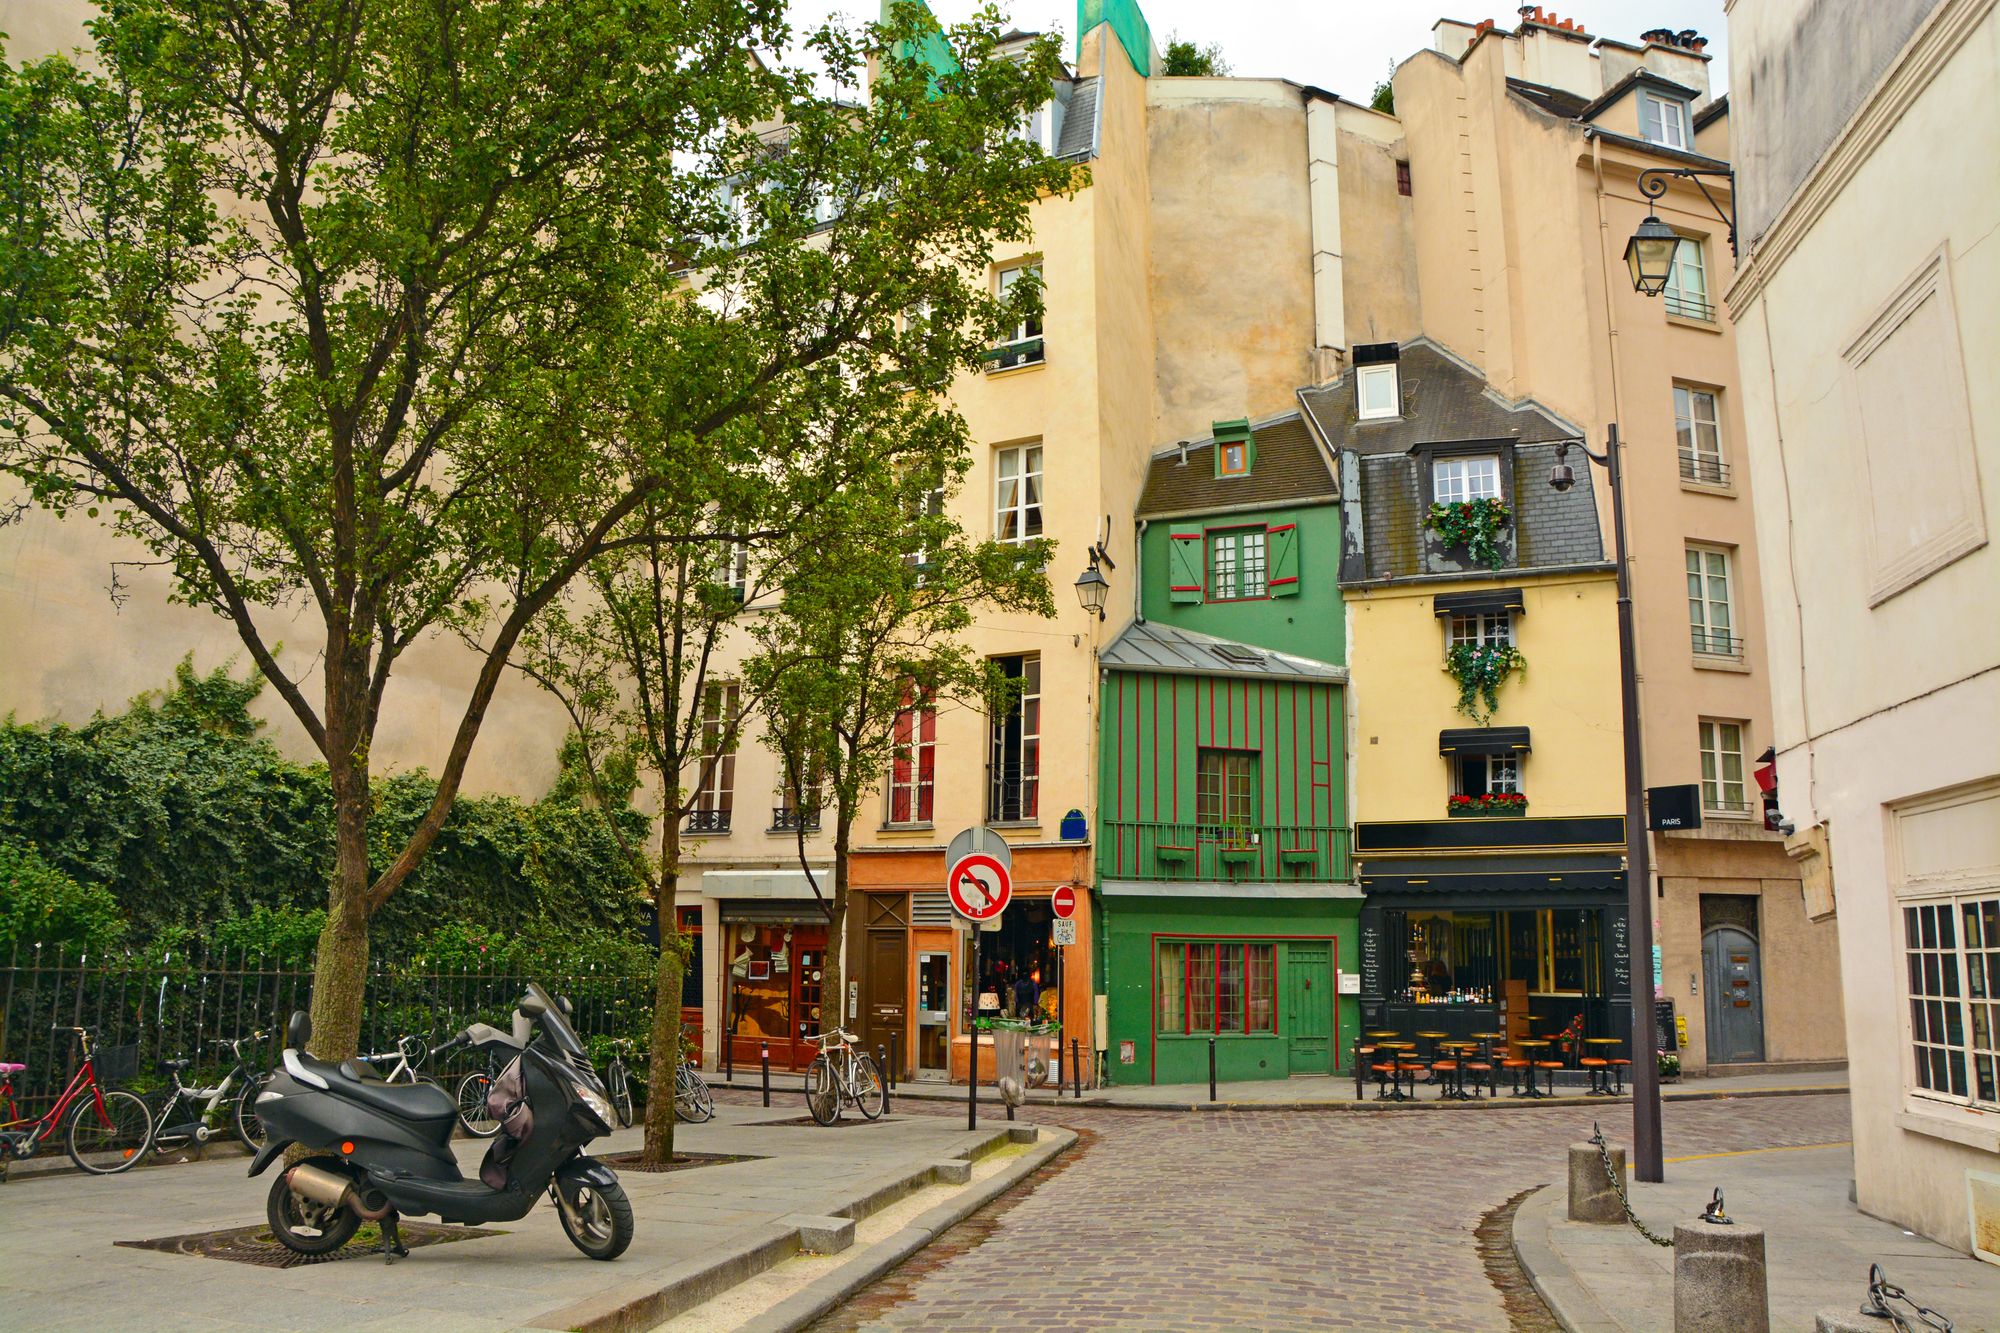 The 5 Most Overlooked Destinations in Paris